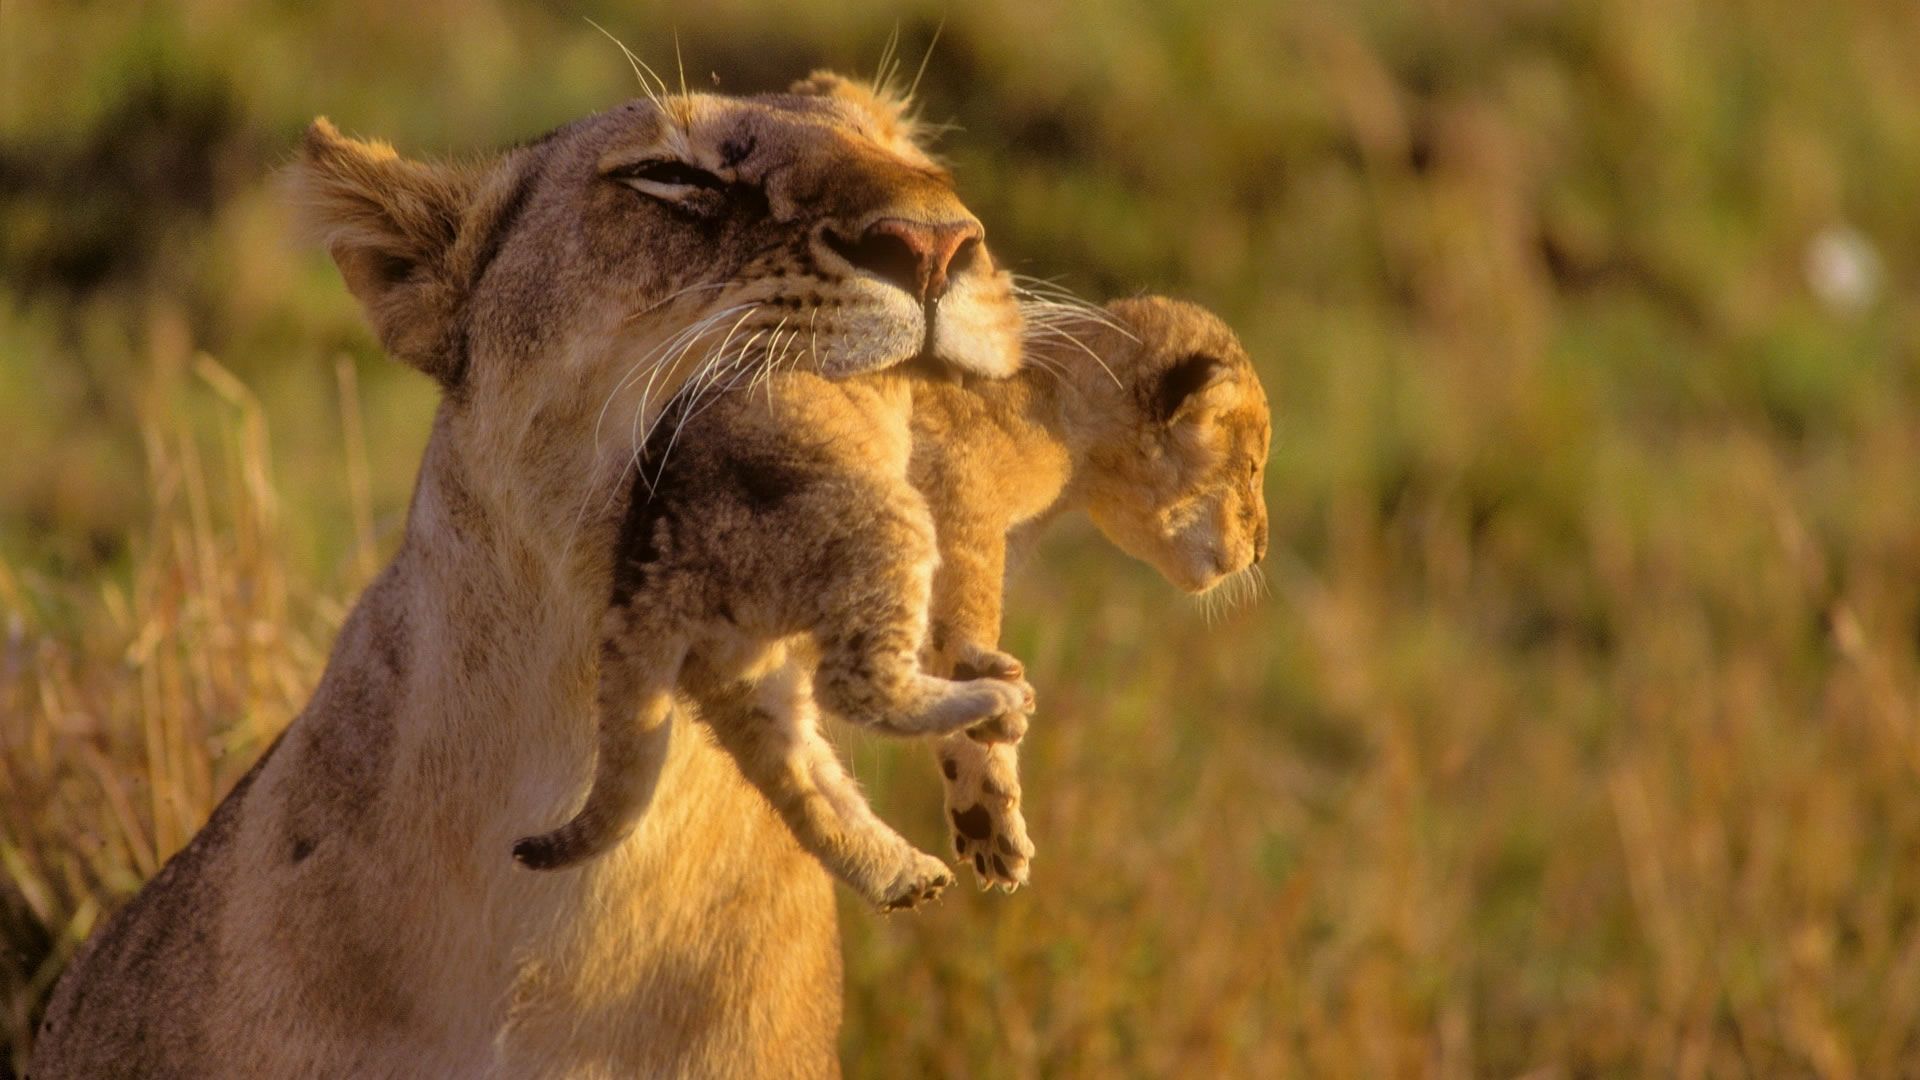 Amazing Mother Lion And Her Baby Wallpaper. Animals beautiful, Cute animals, Animals